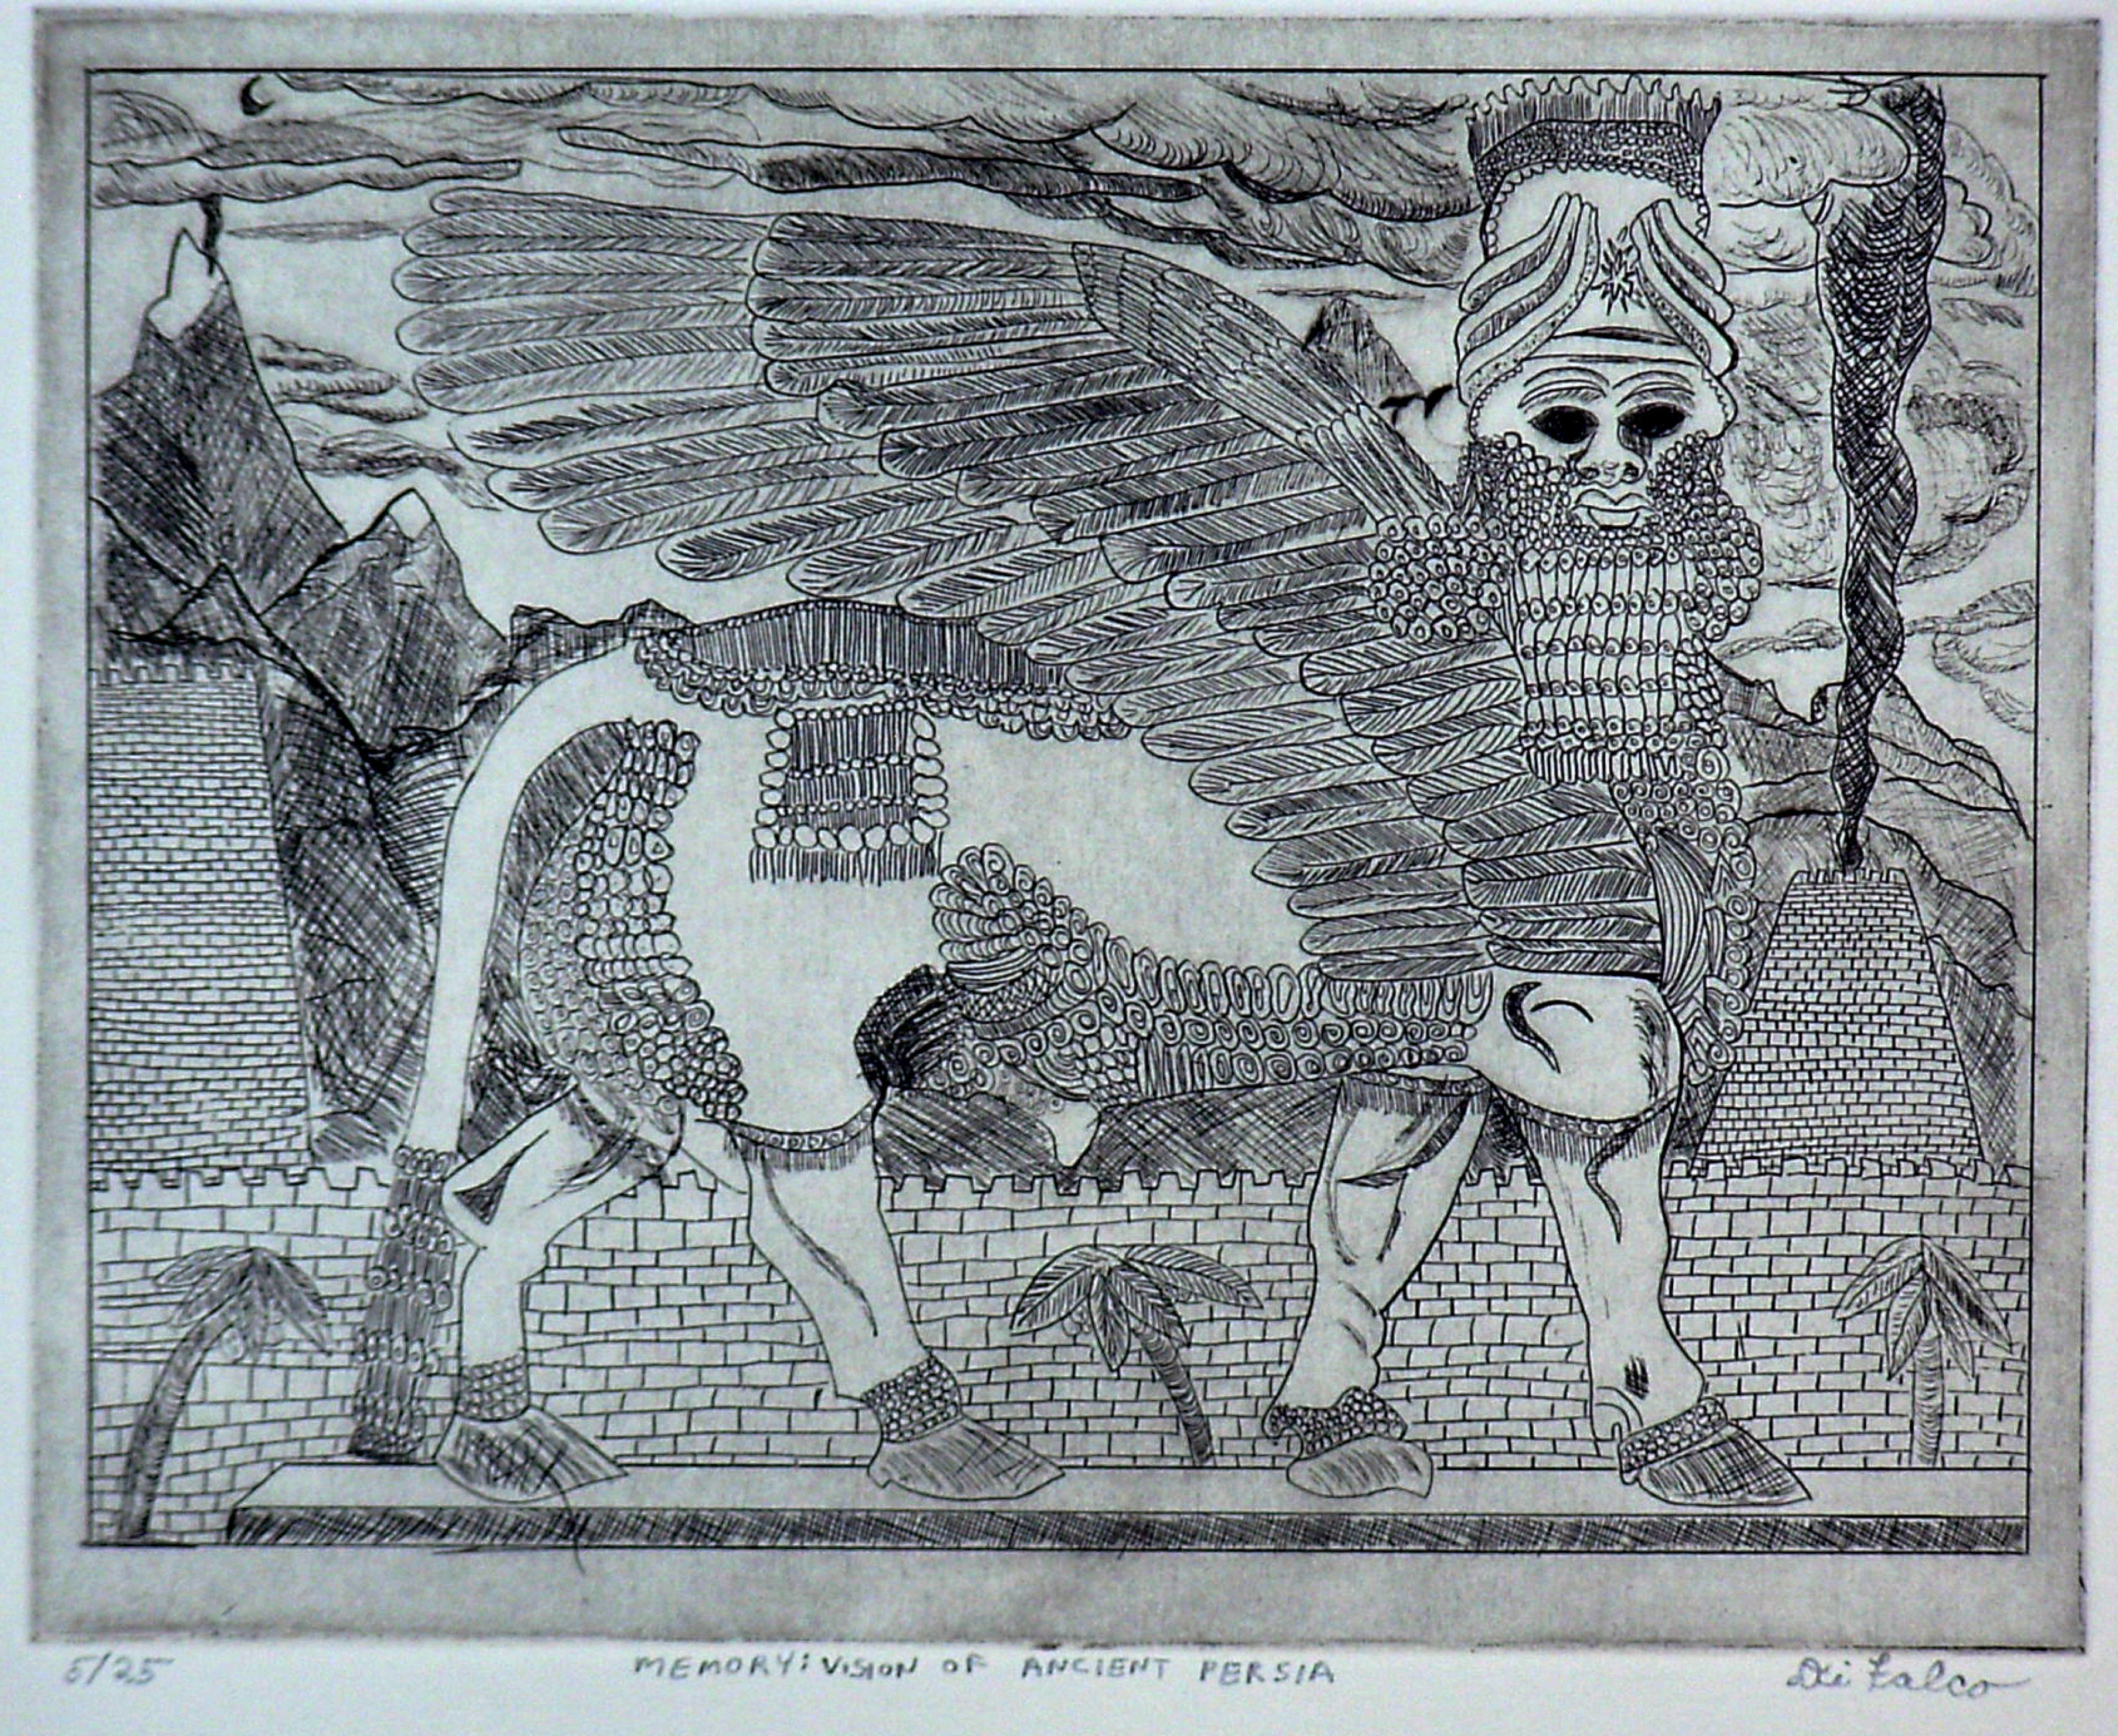 Jerry  Di Falco, 'MEMORY Vision Of Ancient ...', 2009, original Printmaking Etching, 15 x 15  inches. Artwork description: 15375 This etching employed a combination of studio techniques including intaglio, dry point, and aquatint. It is from a limited edition of 25 prints. This work used symbols from ancient Persia, including the winged and human faced bull, which has always captivated my imagination. My use of obsessive ...